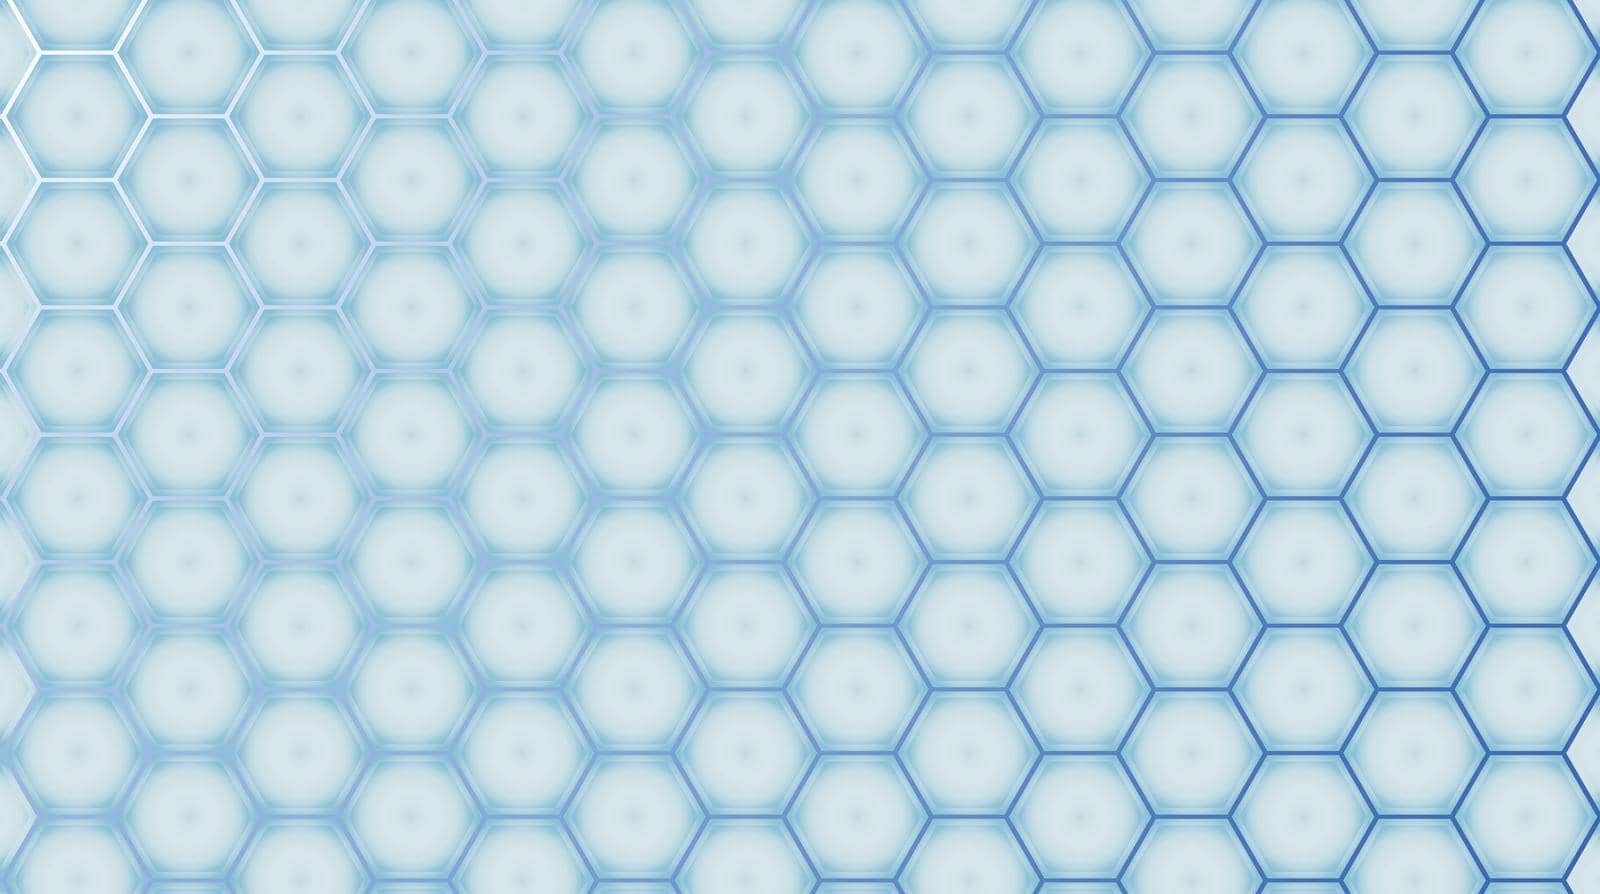 A cold blue honeycomb with a light blue glow gett stronger from left to right